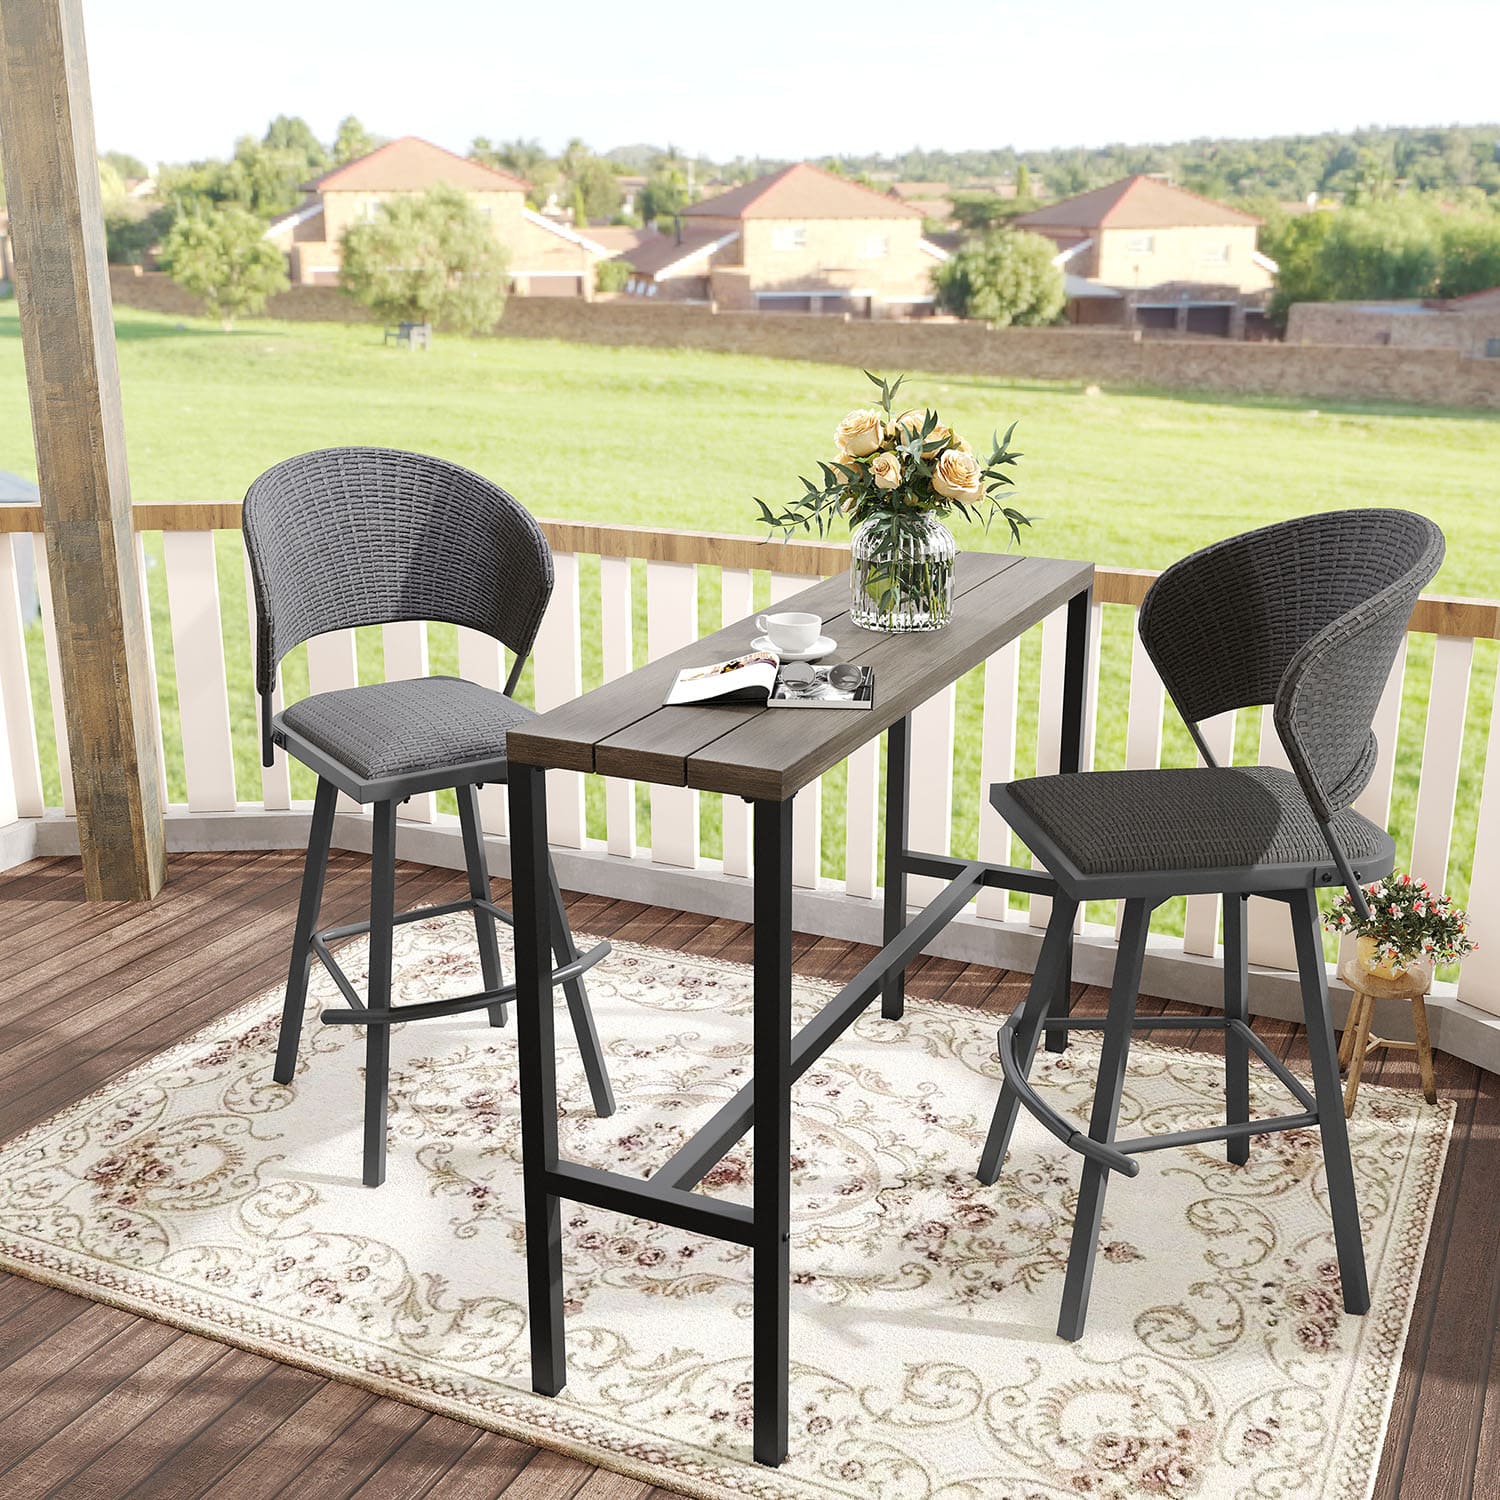 Vicllax 3 PCS Outdoor Swivel Bar Set, Patio Bar Height Wicker Chairs and Rectangular Bar Table